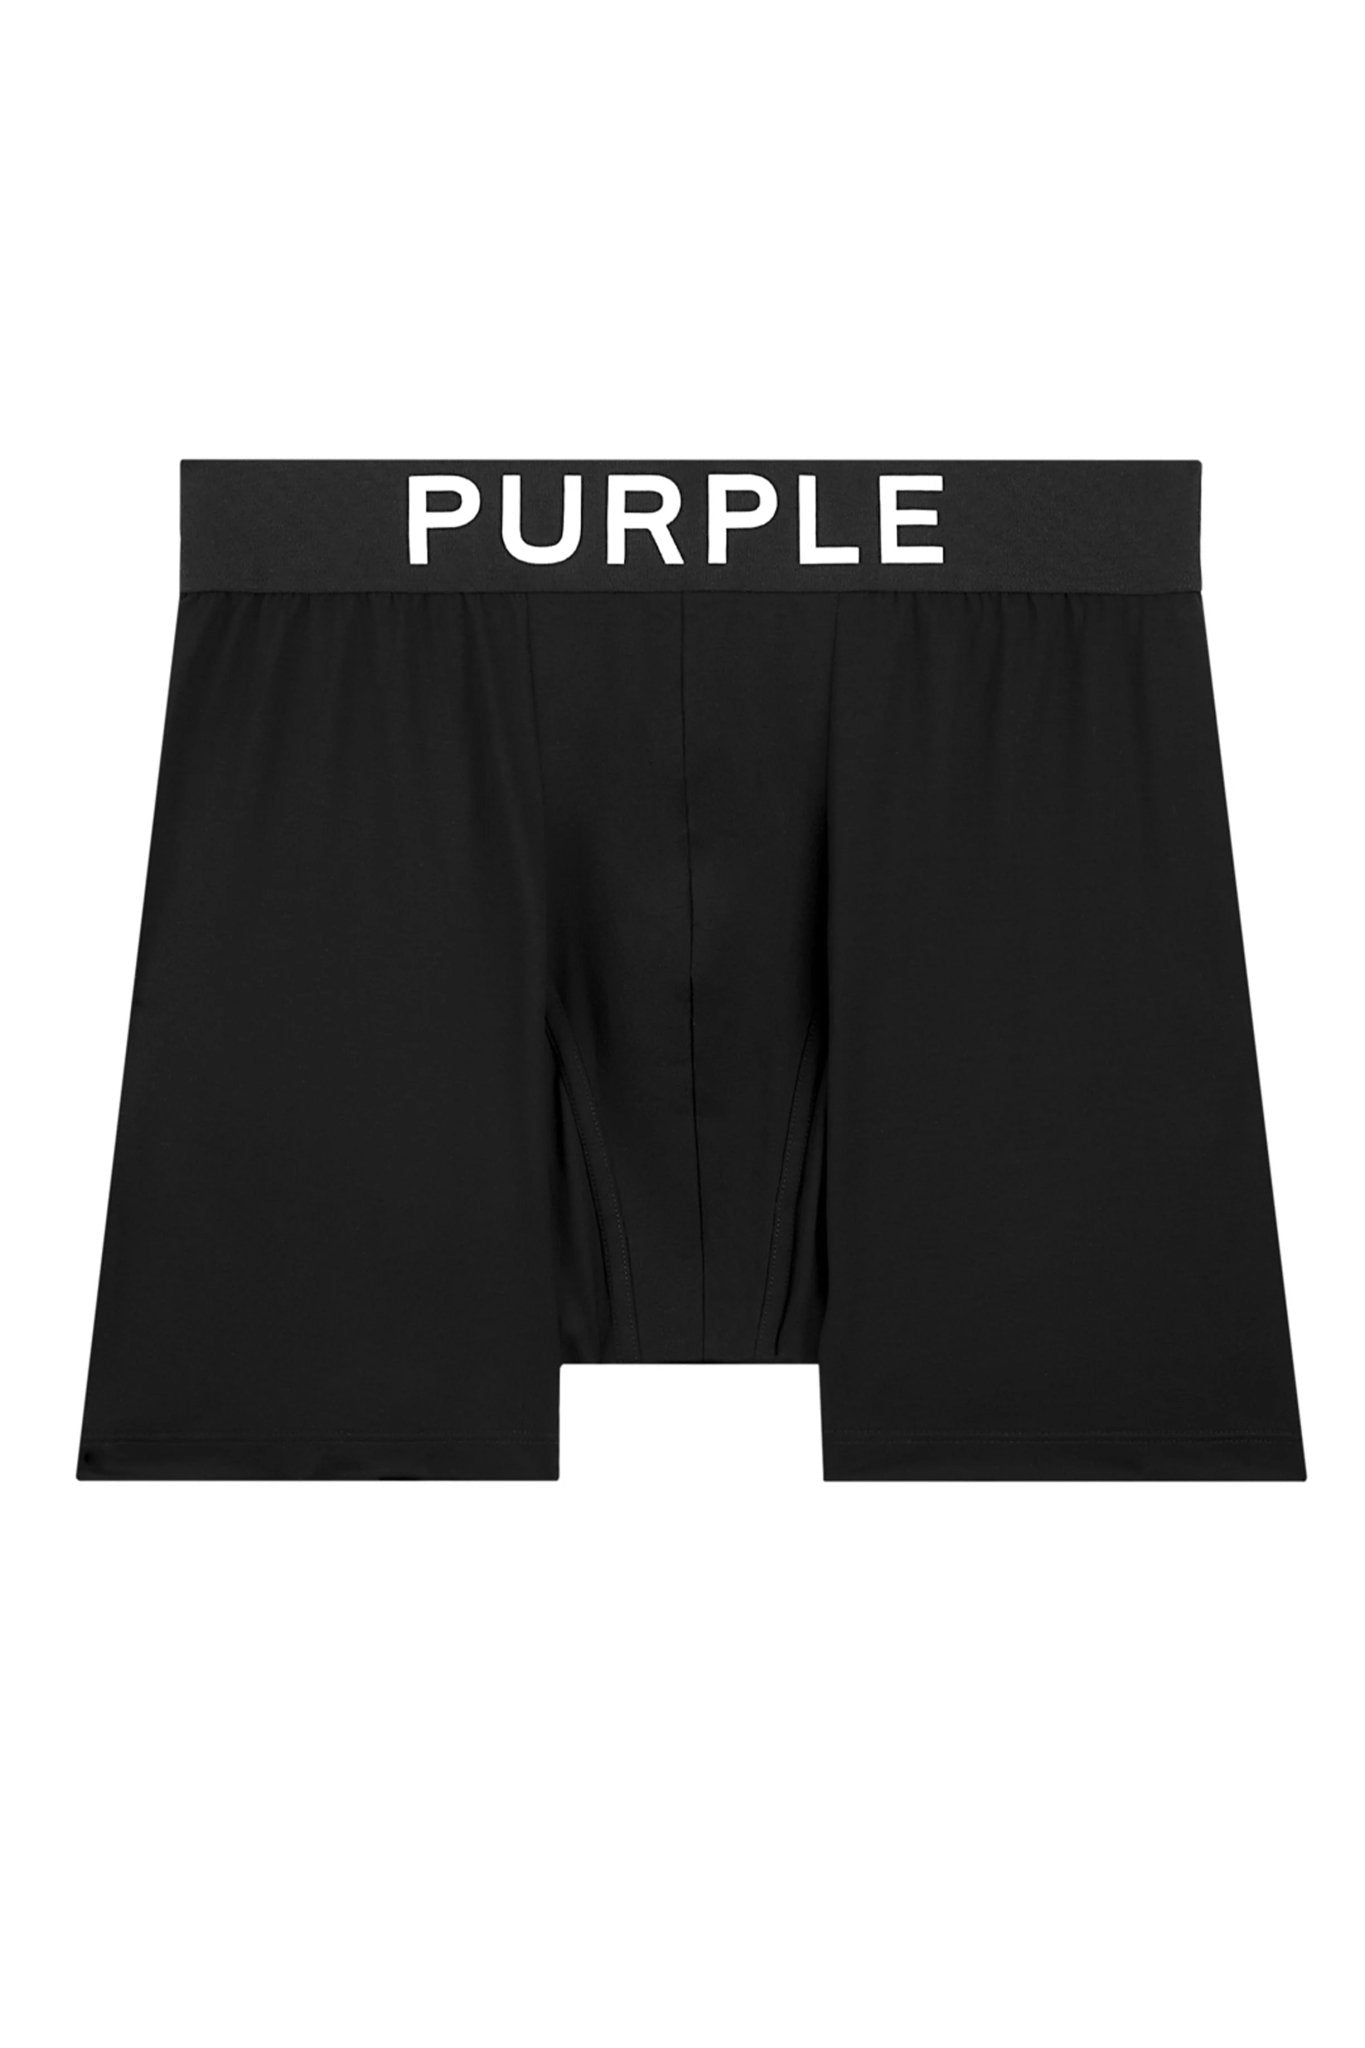 A PURPLE BRAND P802-MCMG 3 pack boxer brief with ergonomic support system and the word "purple" on it.